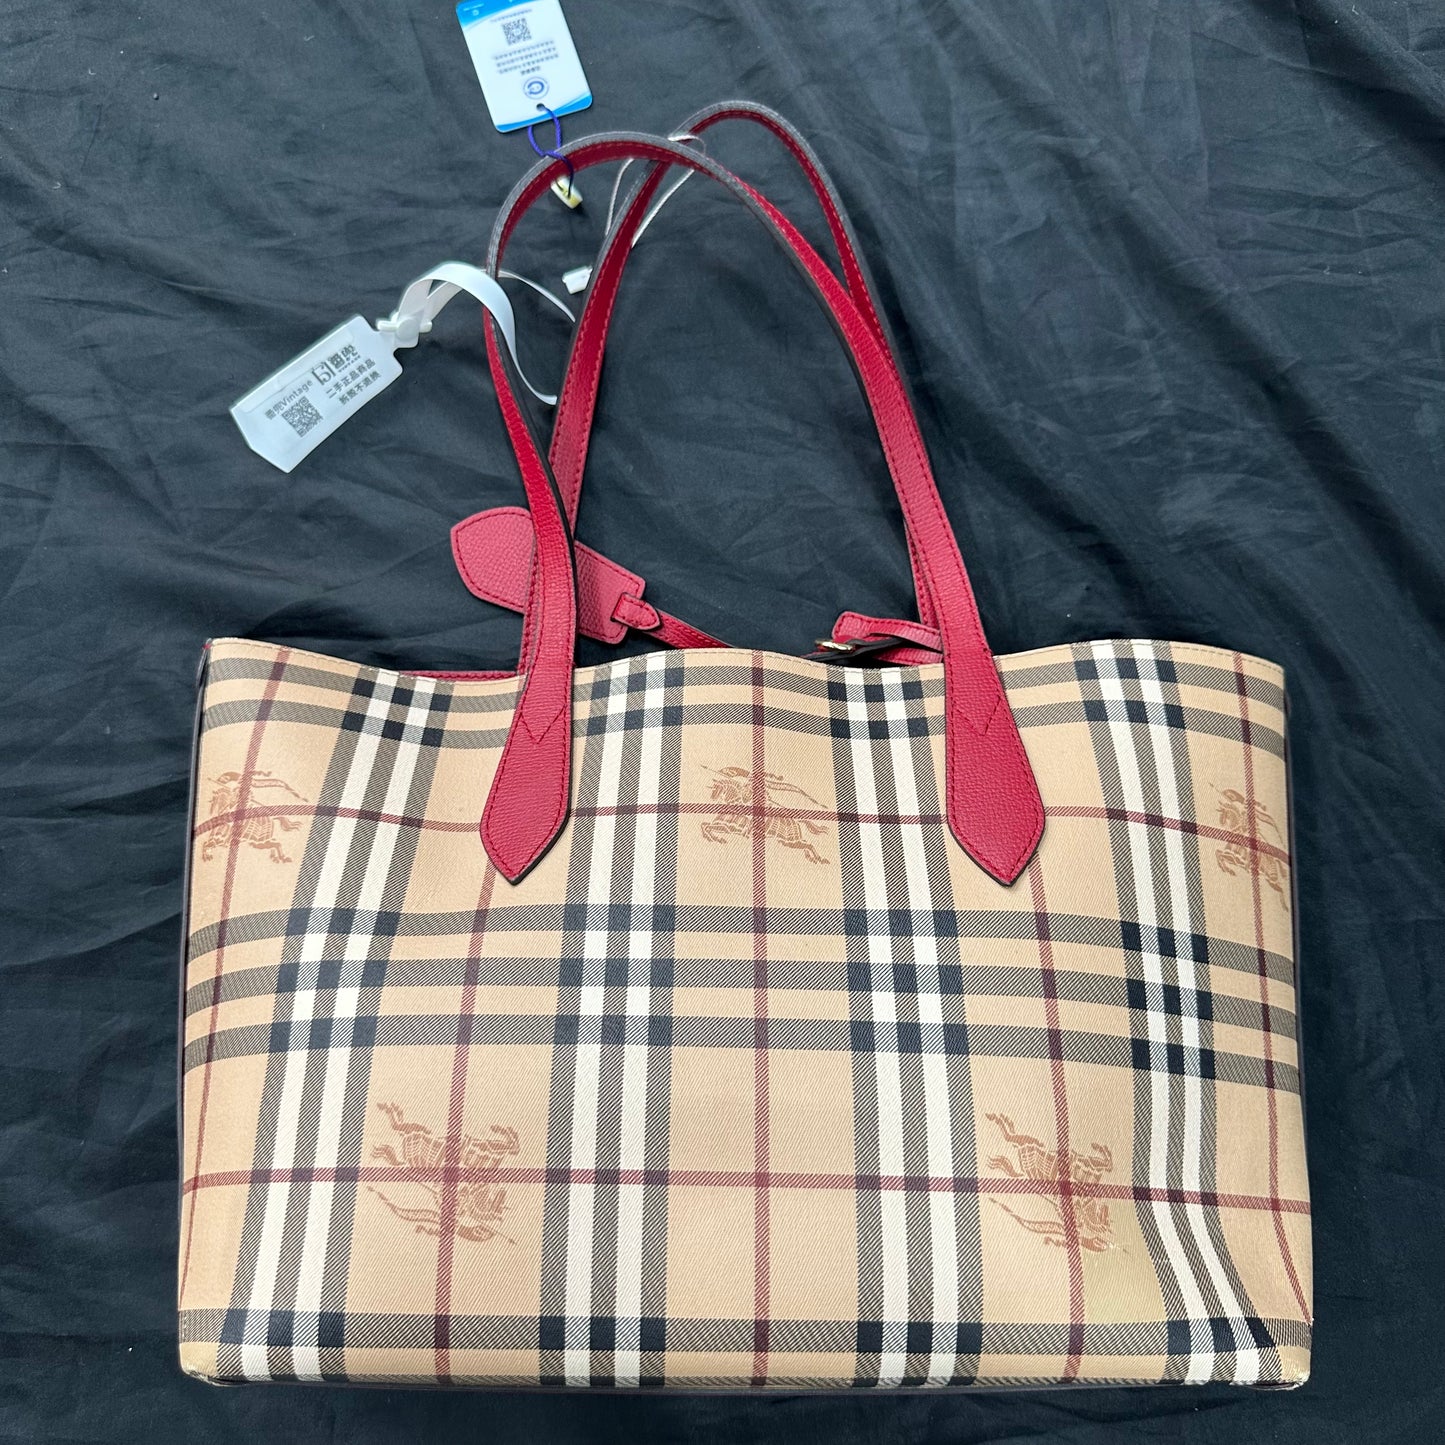 Burberry Classic Canvas Tote Bag